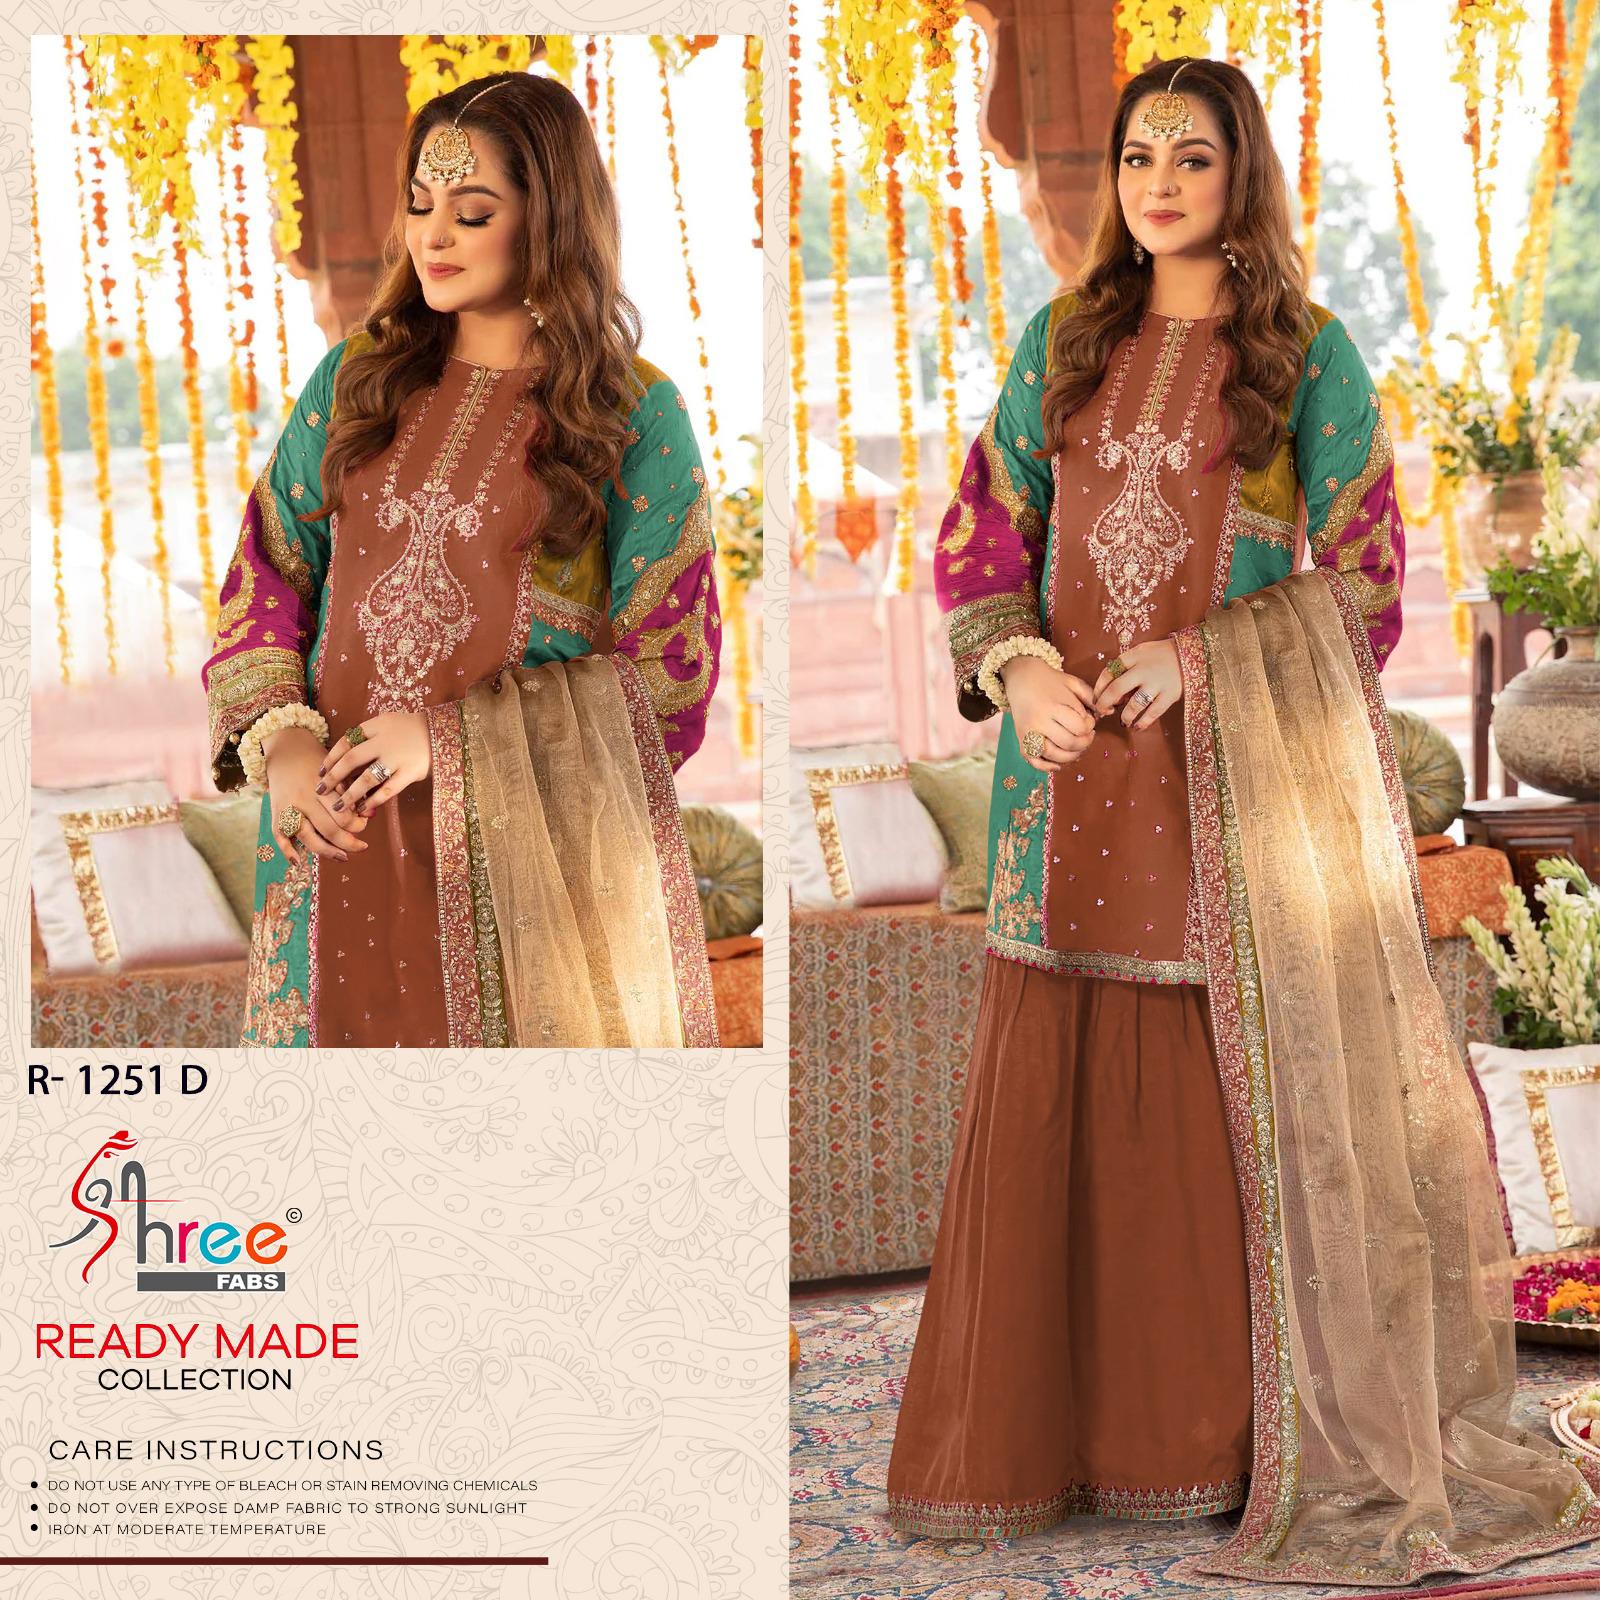 SHREE FAB READY MADE COLLECTION R-1251-D